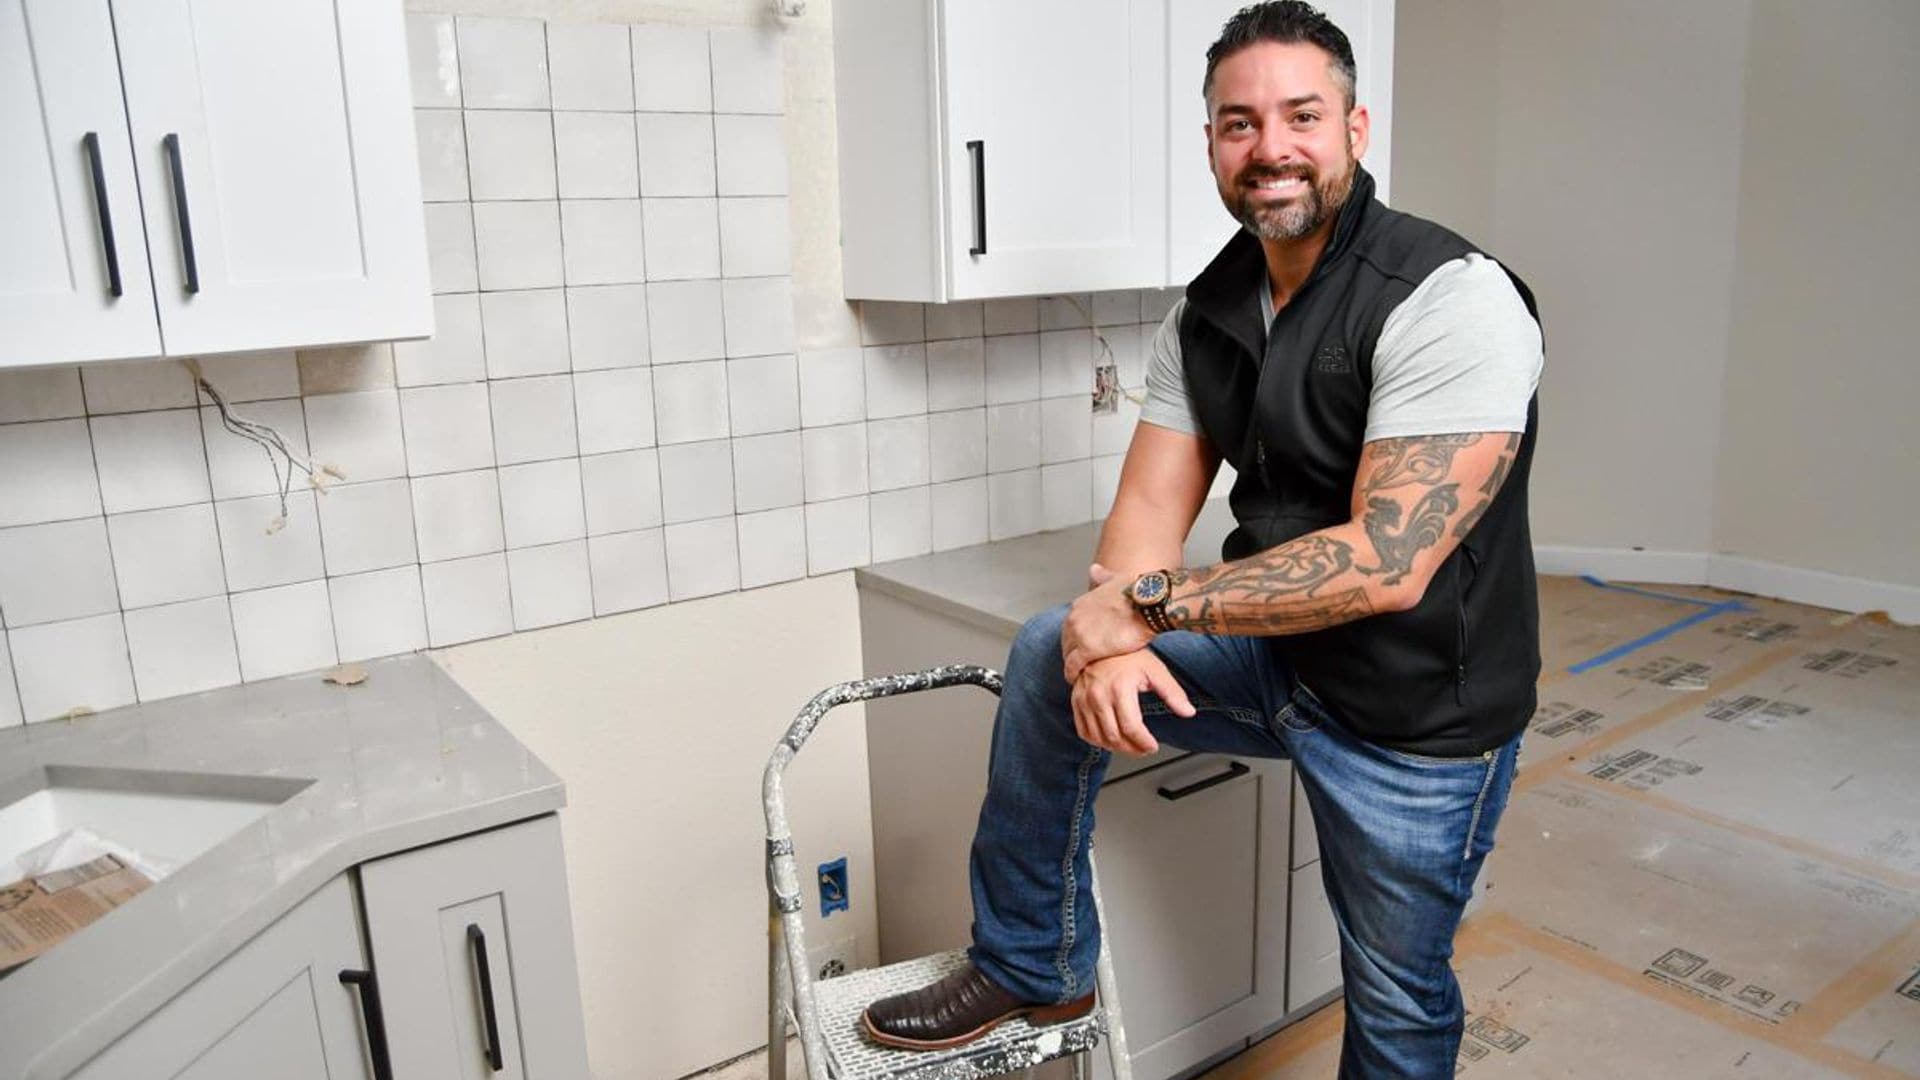 Puerto Rican builder Rico León stars in HGTV’s ‘Rico To The Rescue’